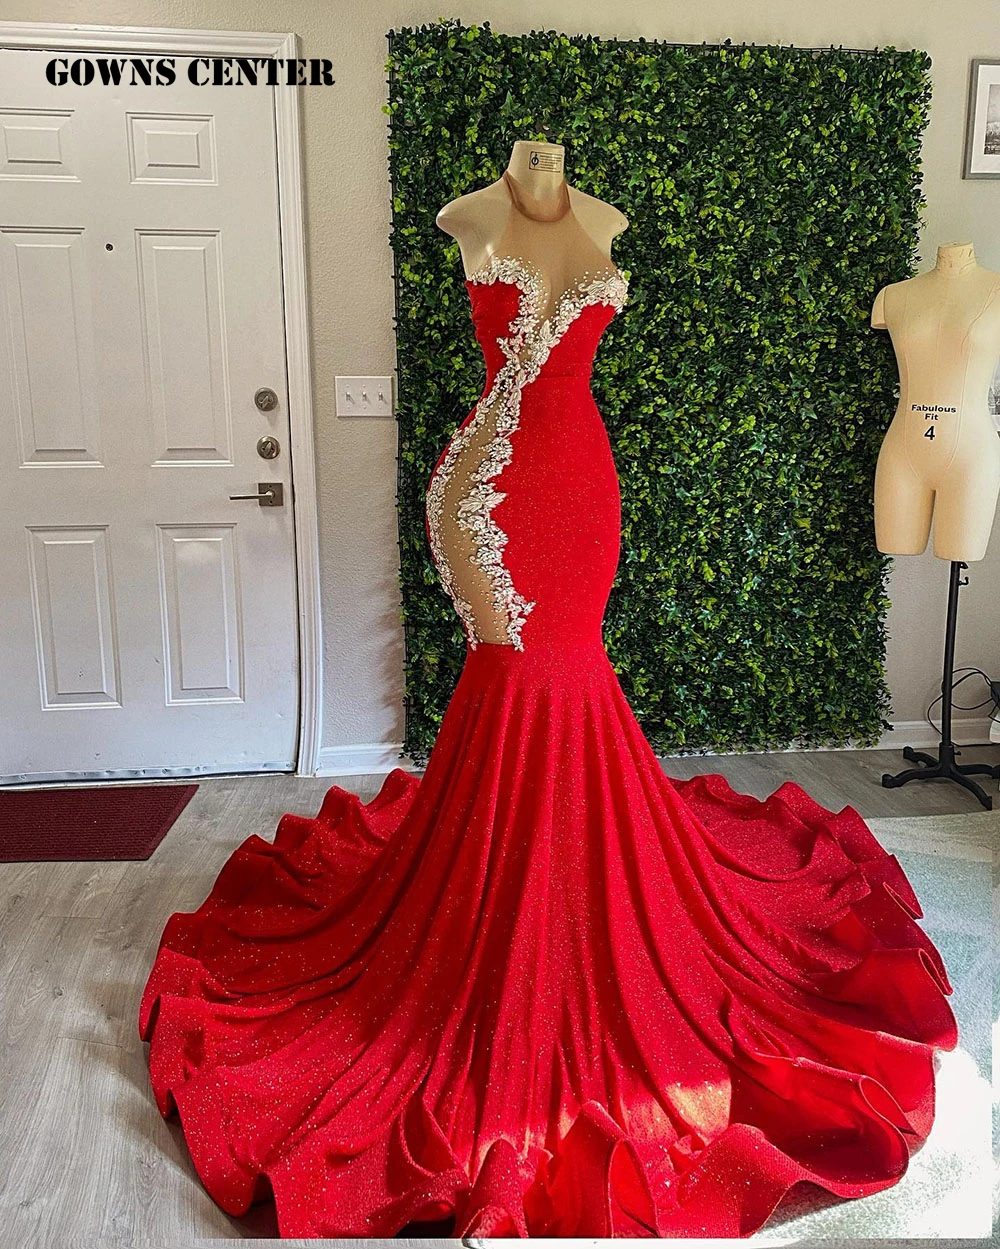 

Sparkly Red Halter Prom Dresses For Black Girls Sliver Beaded Mermaid Dresses For Party Wedding Evening Cocktail Gowns vestidos